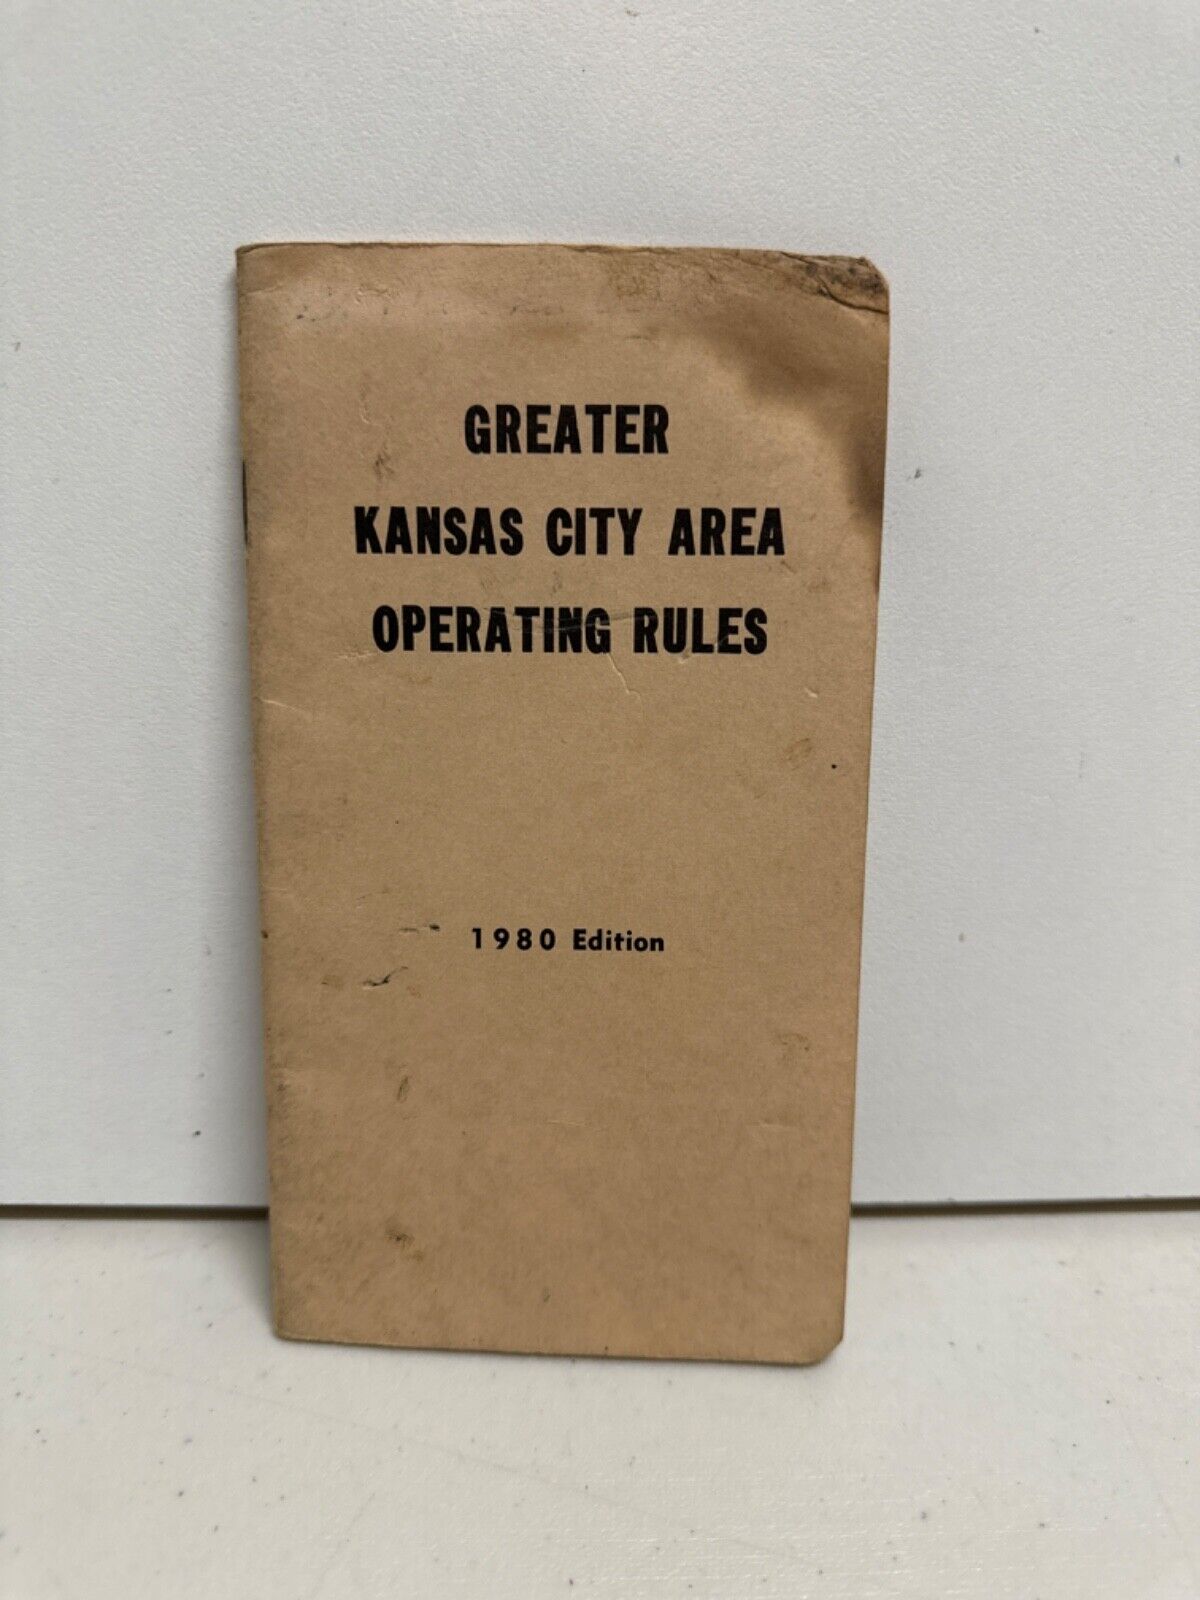 Railroad Employee Manual Greater Kansas City Area Operating Rules 1980 Edition